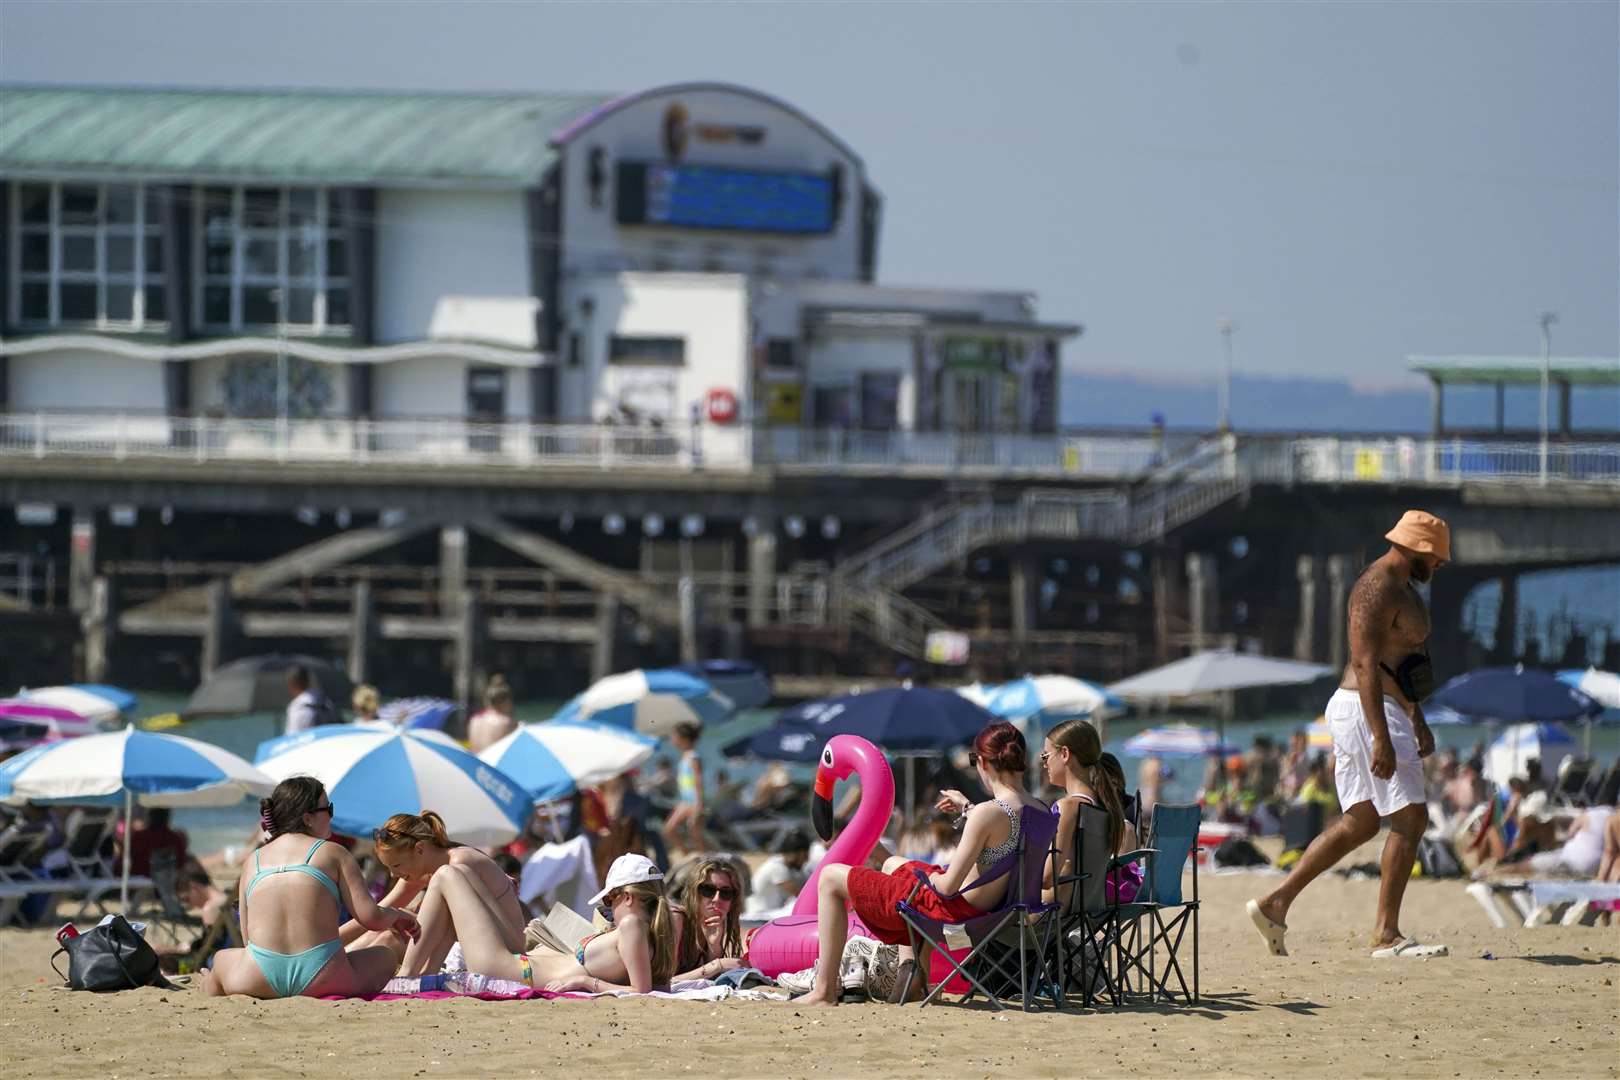 There were lots of parasols up to keep out the sun (Steve Parsons/PA)